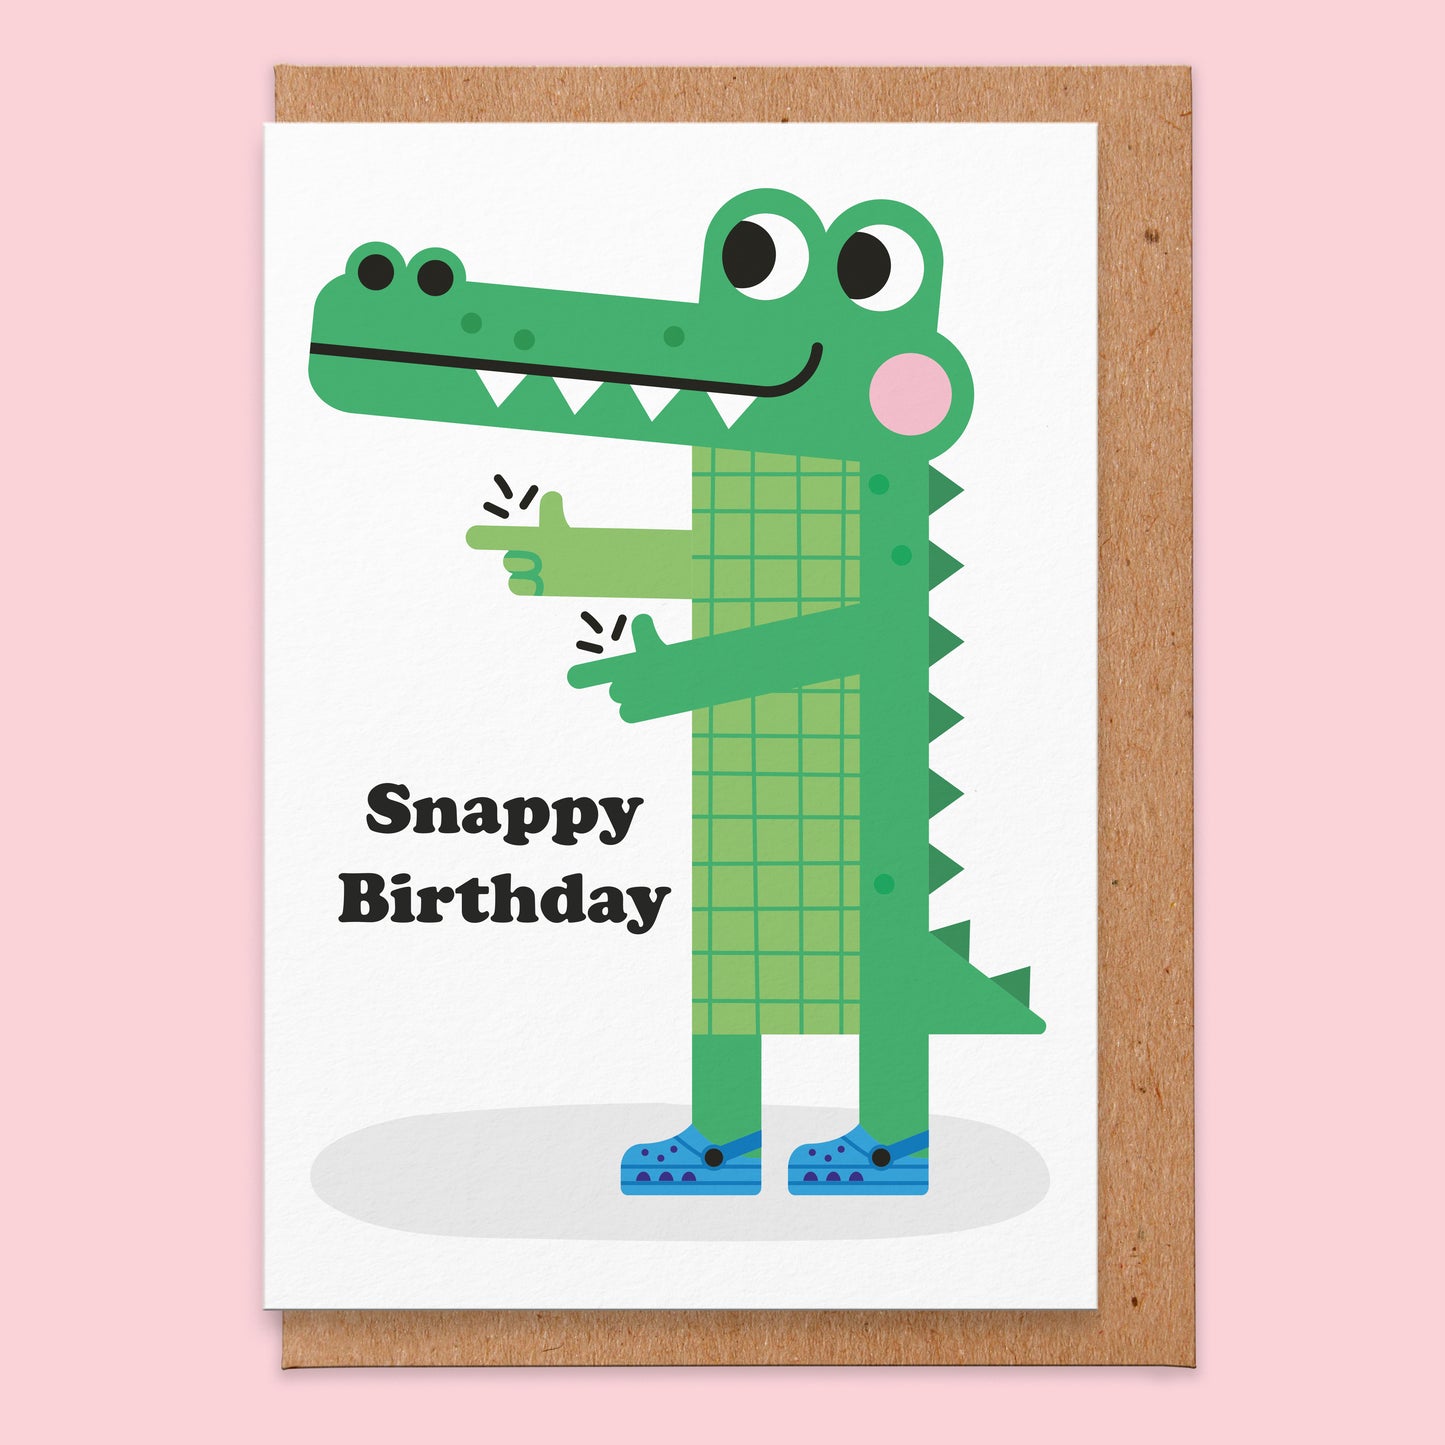 Birthday card that reads snappy birthday and has an illustration of a crocodile.